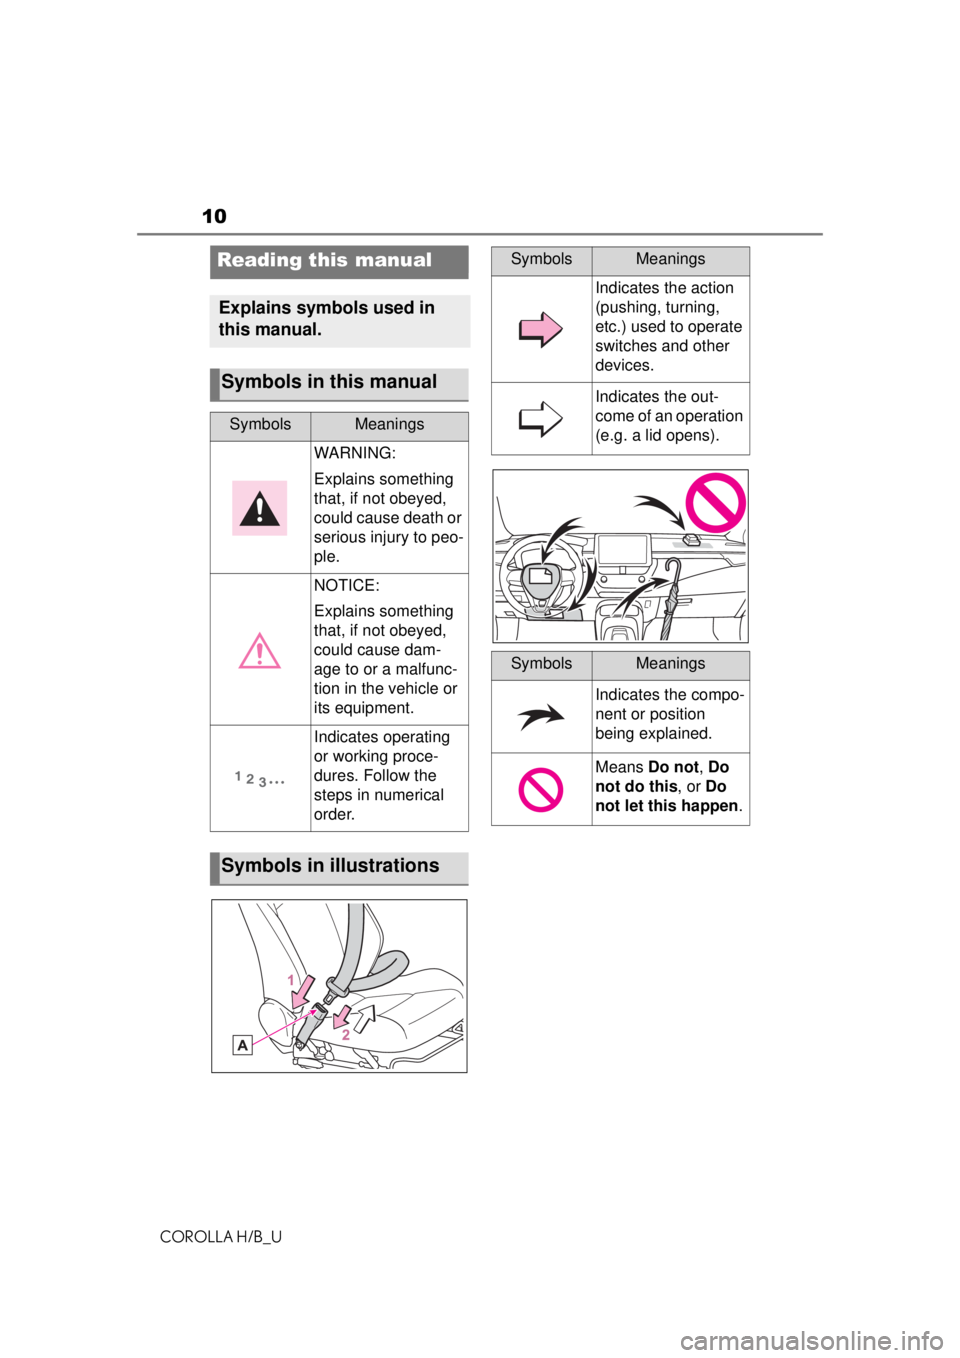 TOYOTA COROLLA HATCHBACK 2021  Owners Manual (in English) 10
COROLLA H/B_U
Reading this manual
Explains symbols used in 
this manual.
Symbols in this manual
SymbolsMeanings
WARNING:
Explains something 
that, if not obeyed, 
could cause death or 
serious inju